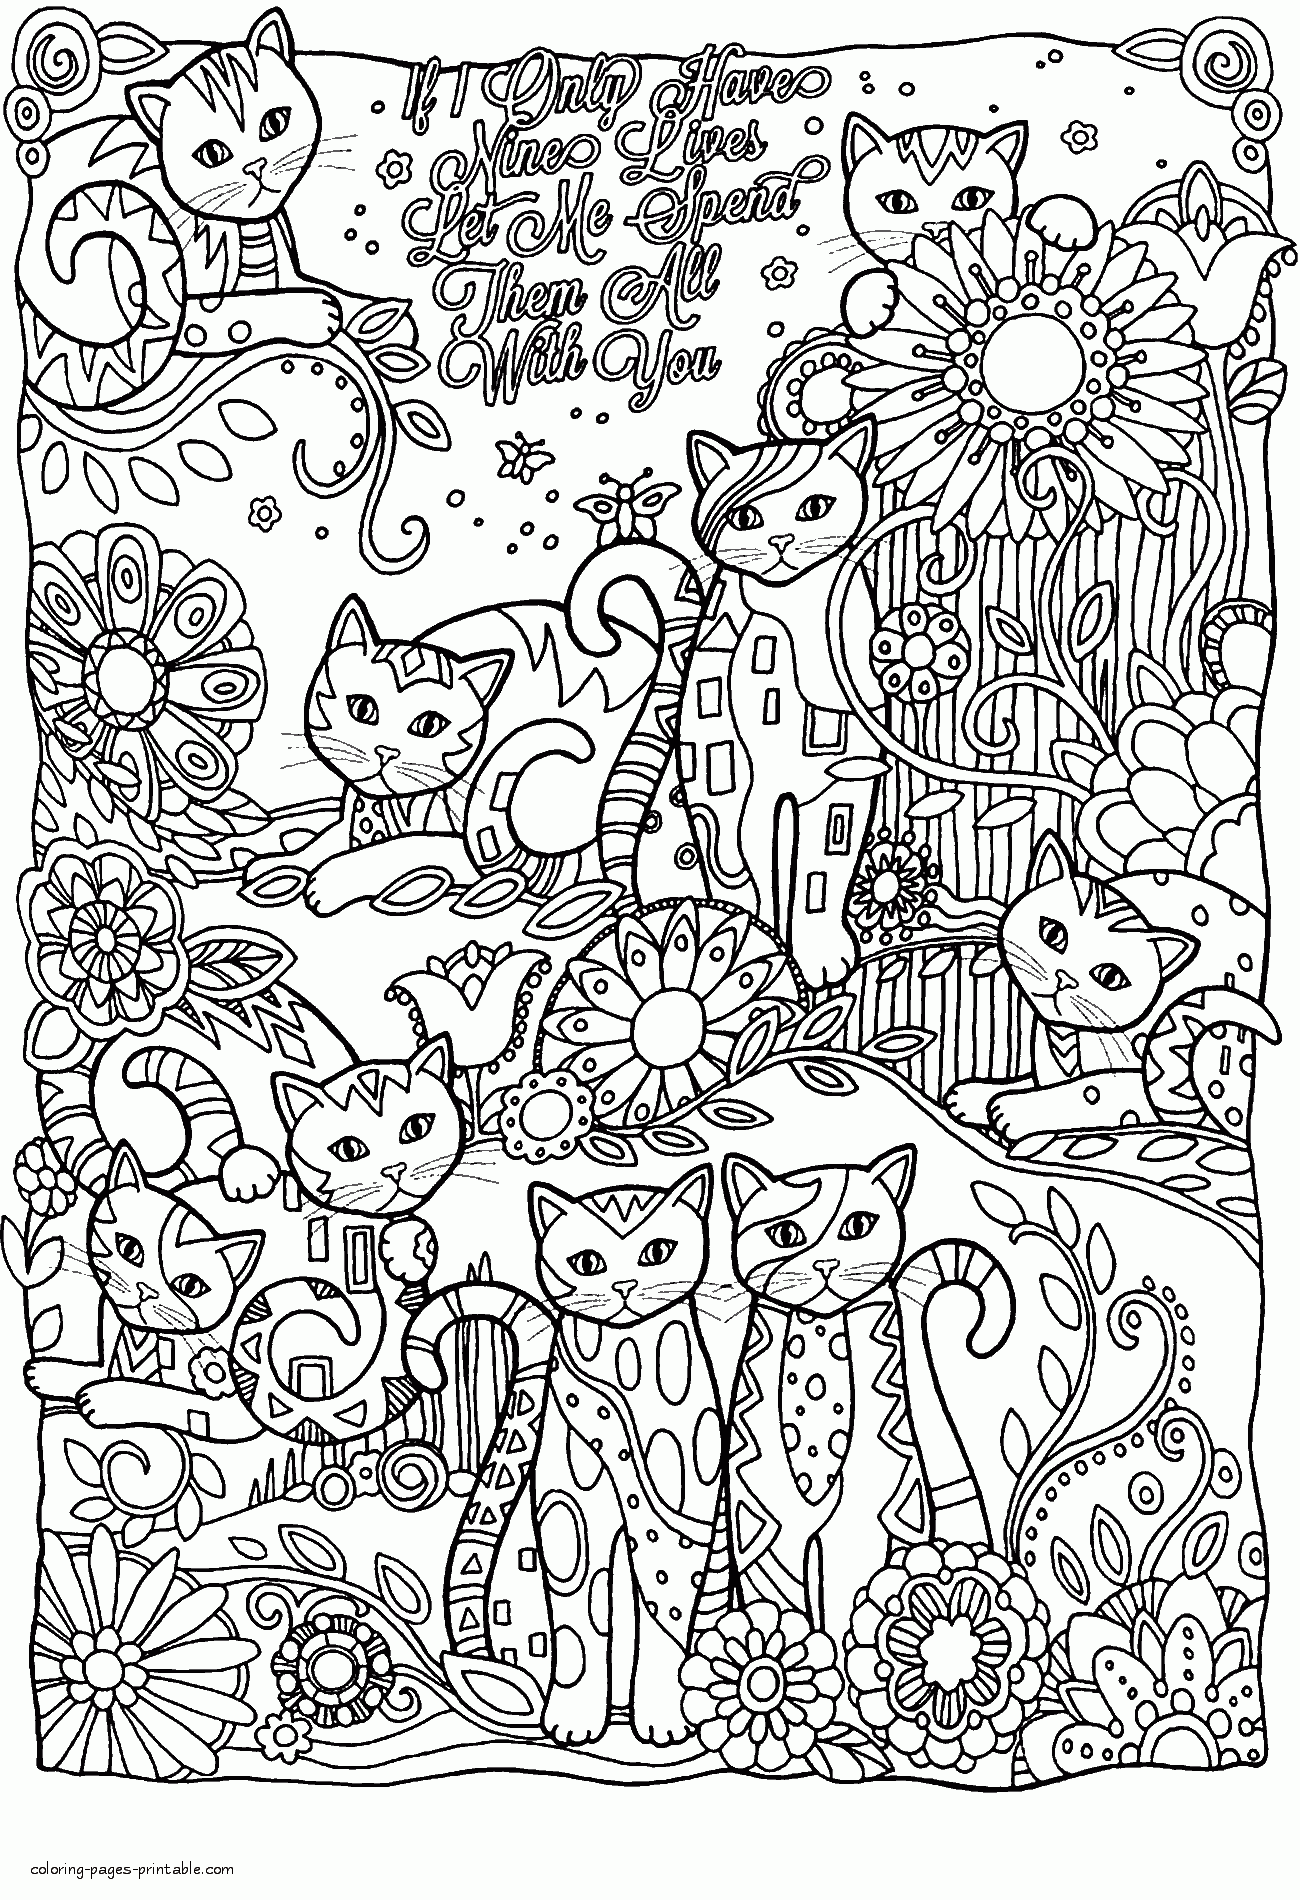 Nine Cats Coloring Page For Adults    COLORING PAGES PRINTABLE.COM